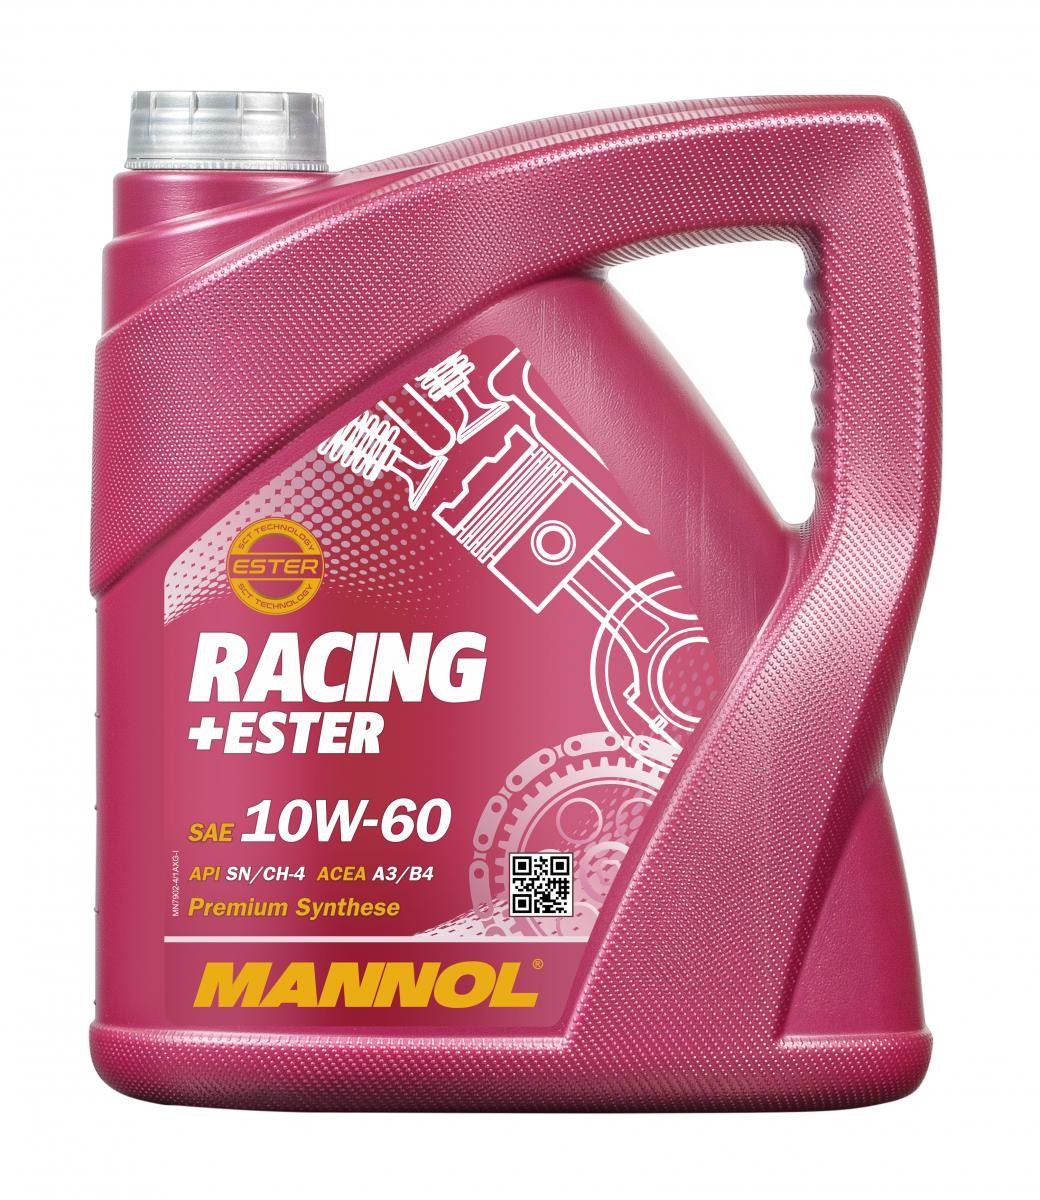 MANNOL RACING+ESTER MN7902-4 Engine oil 10W-60, 4l, Synthetic Oil